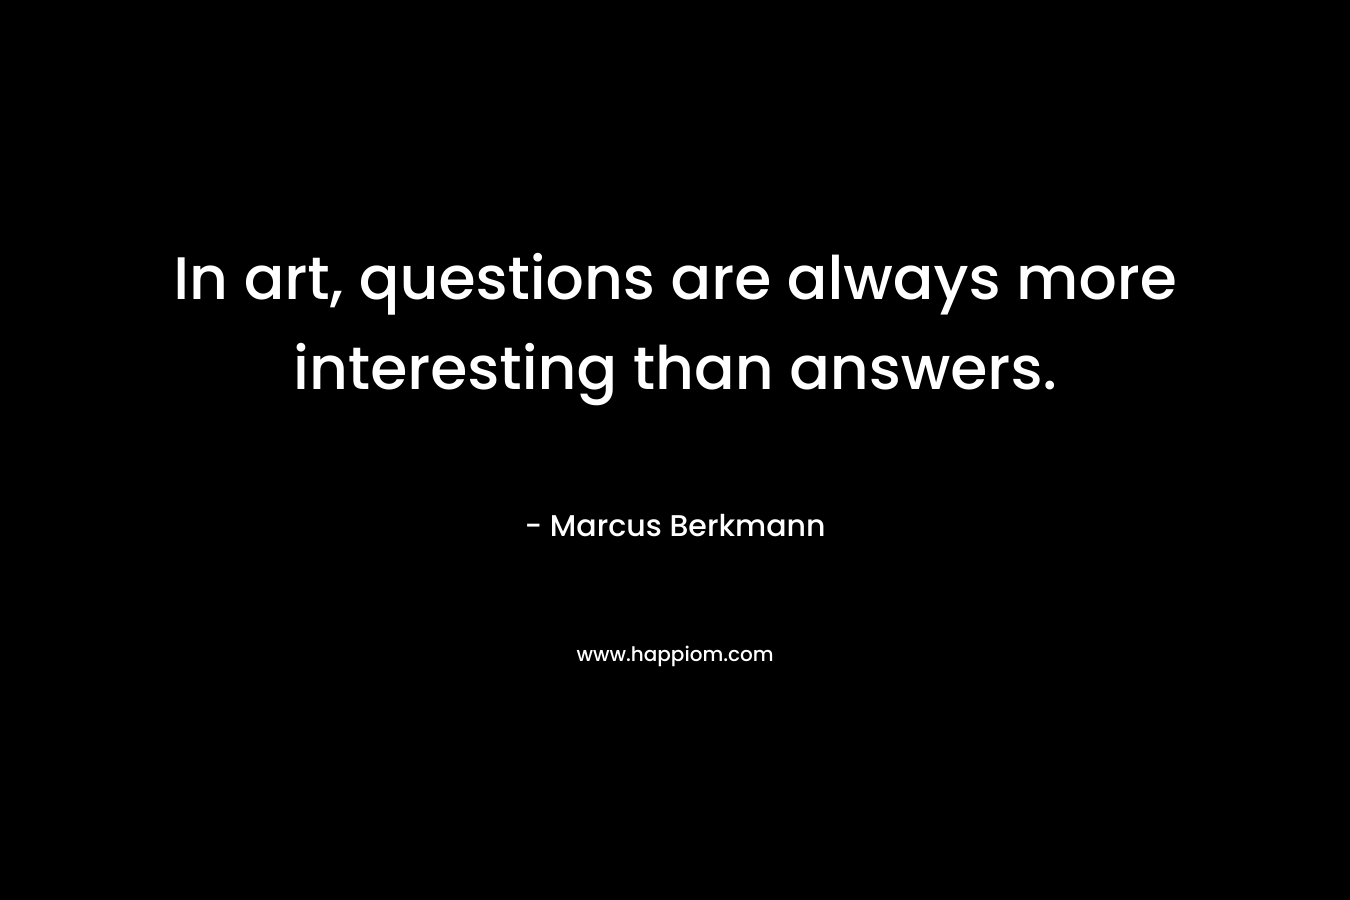 In art, questions are always more interesting than answers.